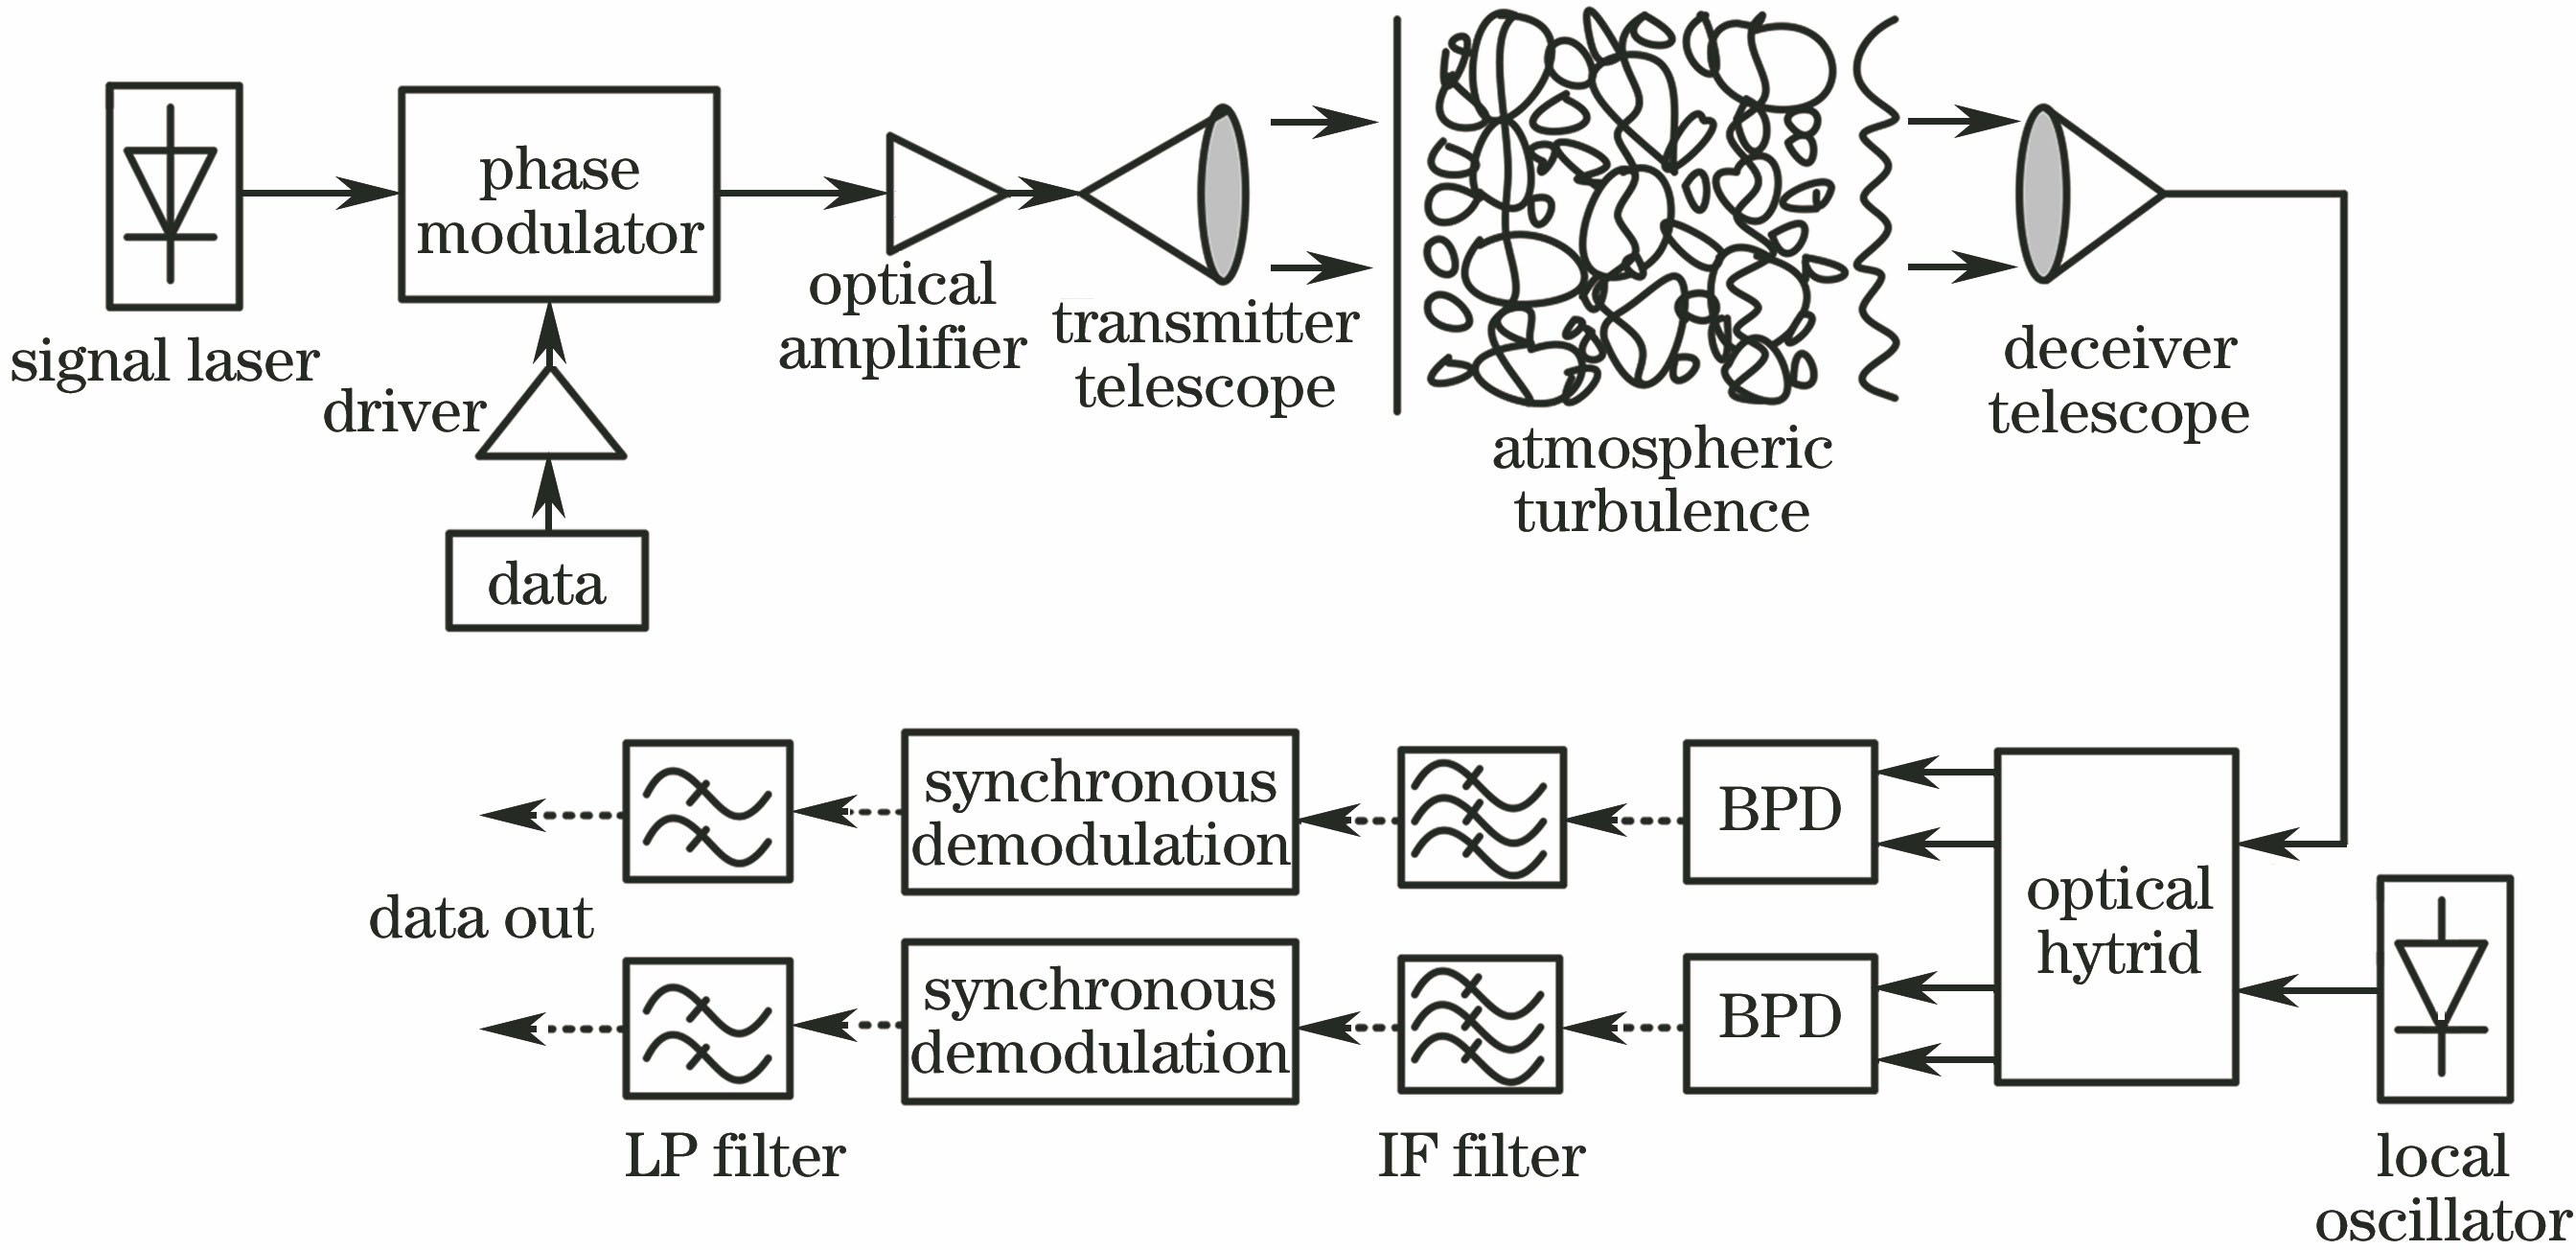 Spatial coherent optical communication system model influenced by atmospheric turbulence